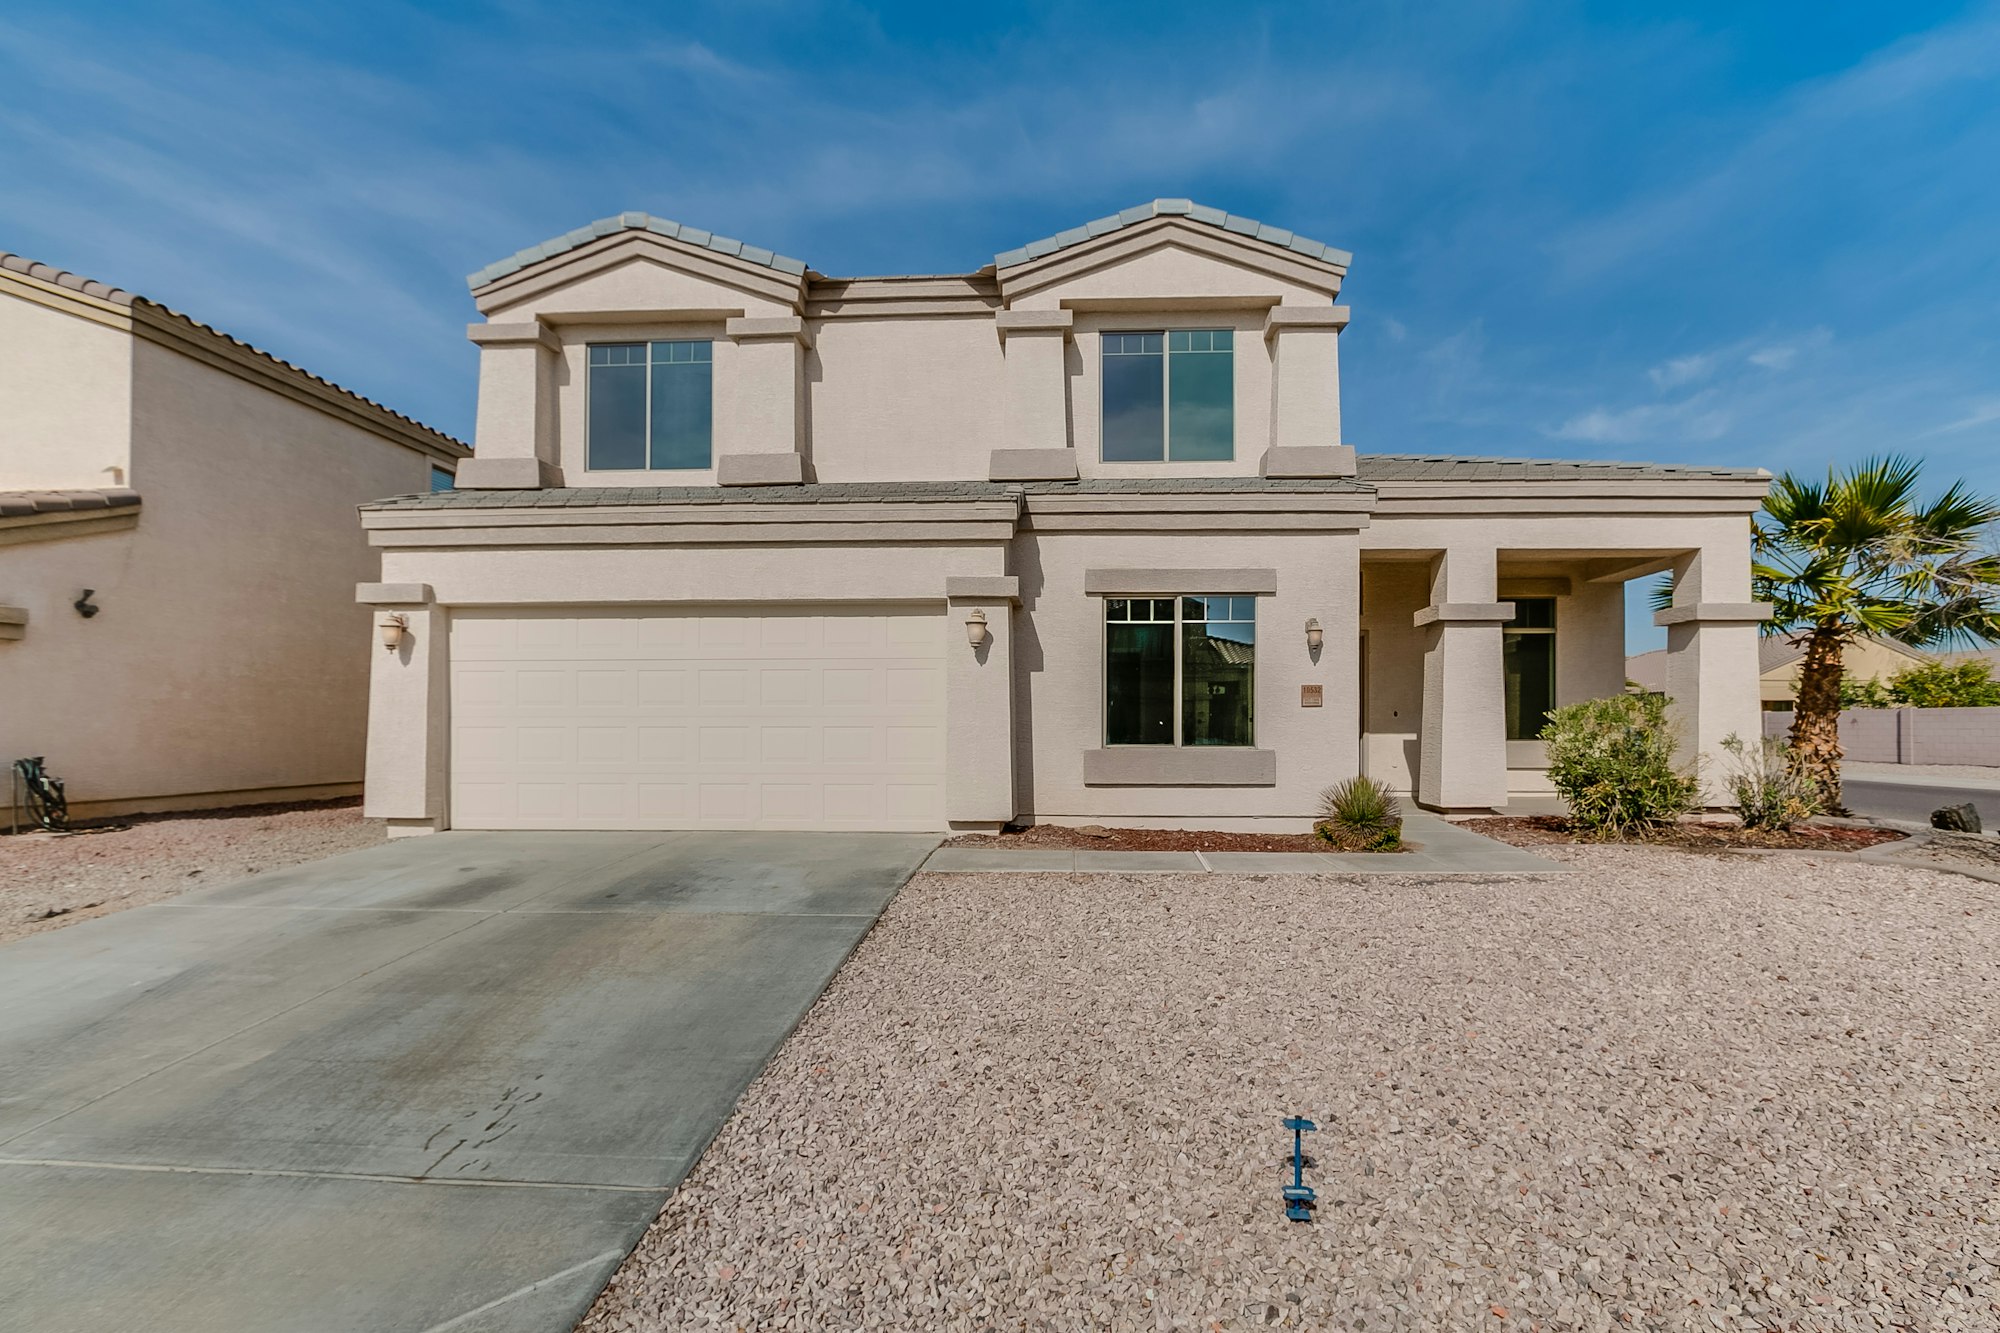 Photo 1 of 44 - 10532 W Mohave St, Tolleson, AZ 85353